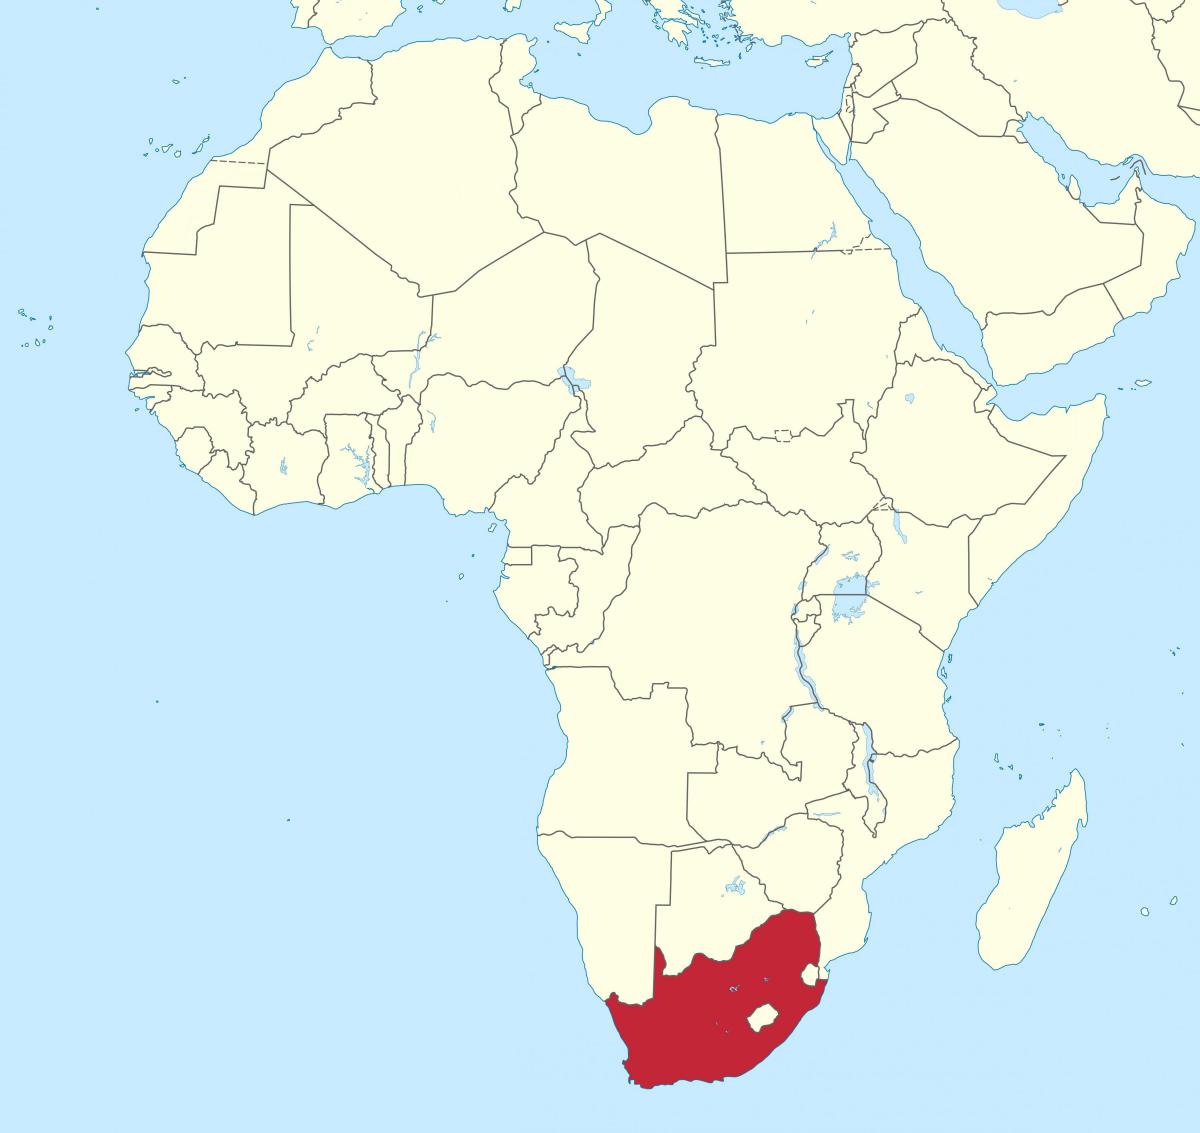 South Africa location on the Africa map